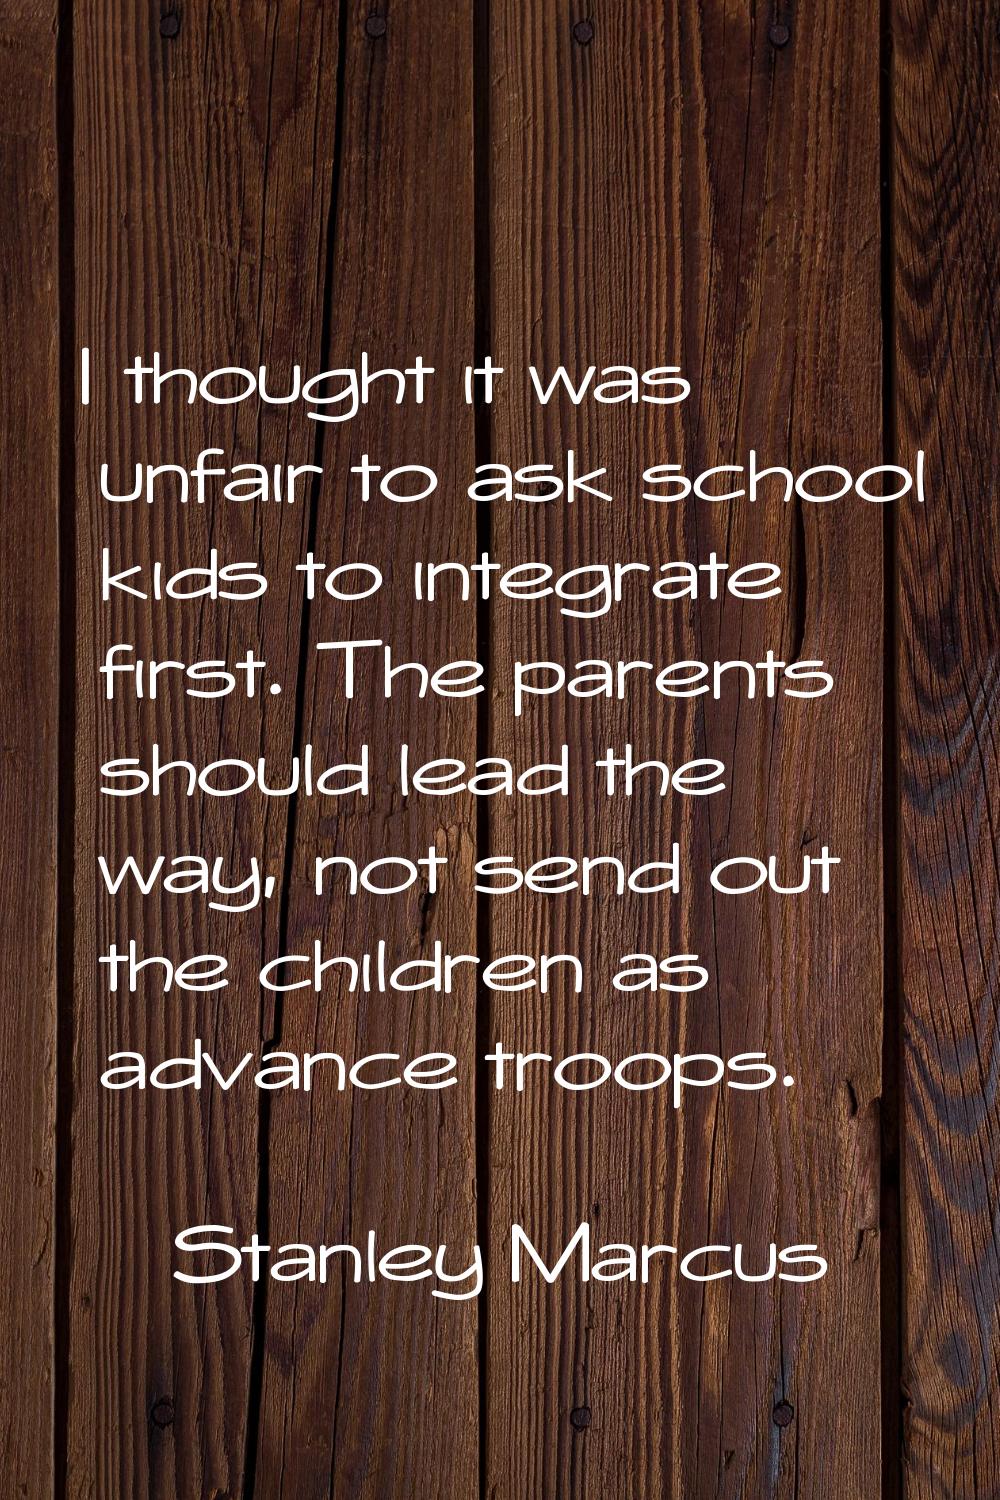 I thought it was unfair to ask school kids to integrate first. The parents should lead the way, not